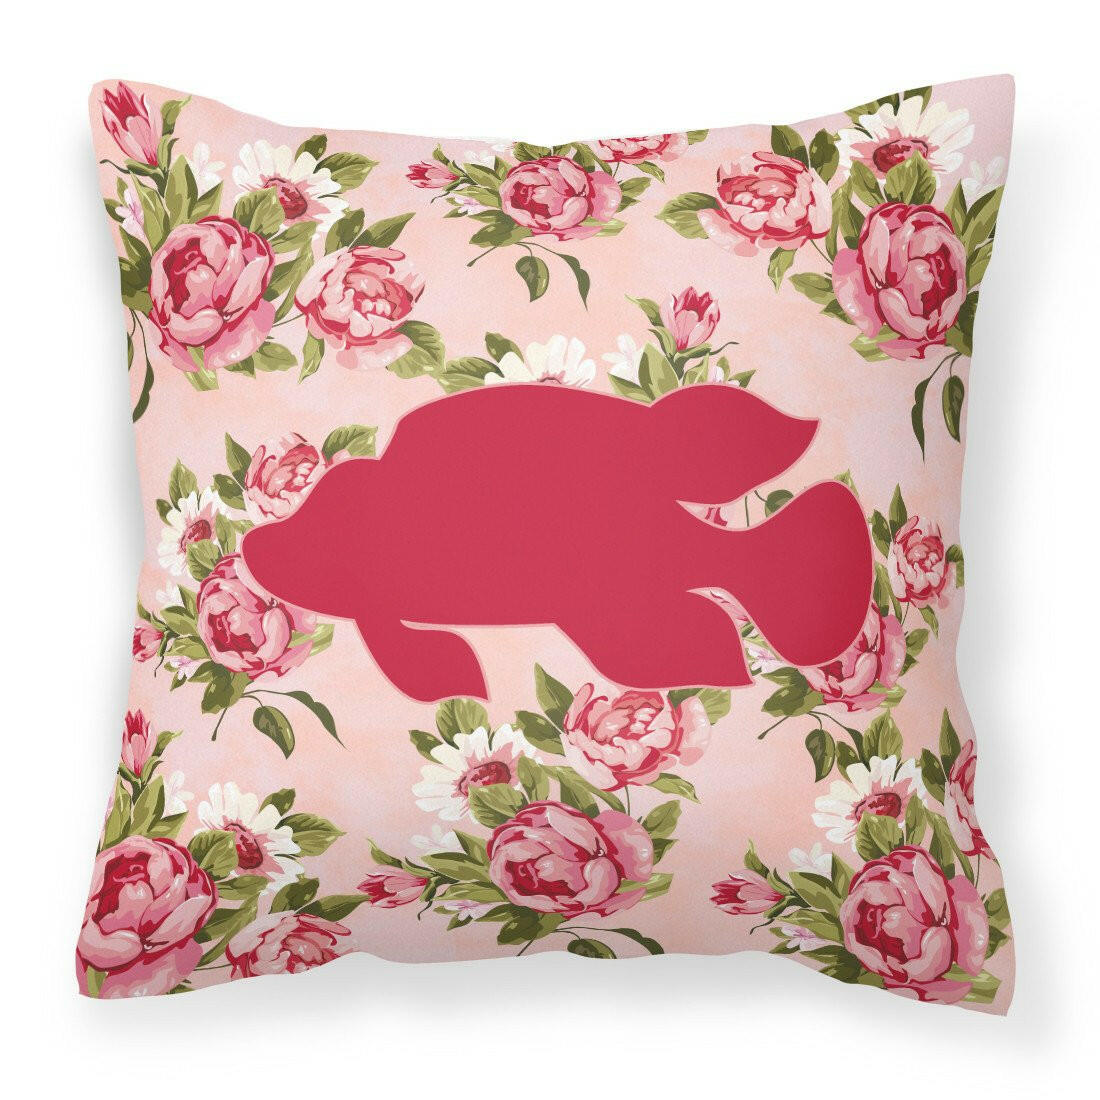 Fish - Tropical Fish Shabby Chic Pink Roses  Fabric Decorative Pillow BB1013-RS-PK-PW1414 - the-store.com